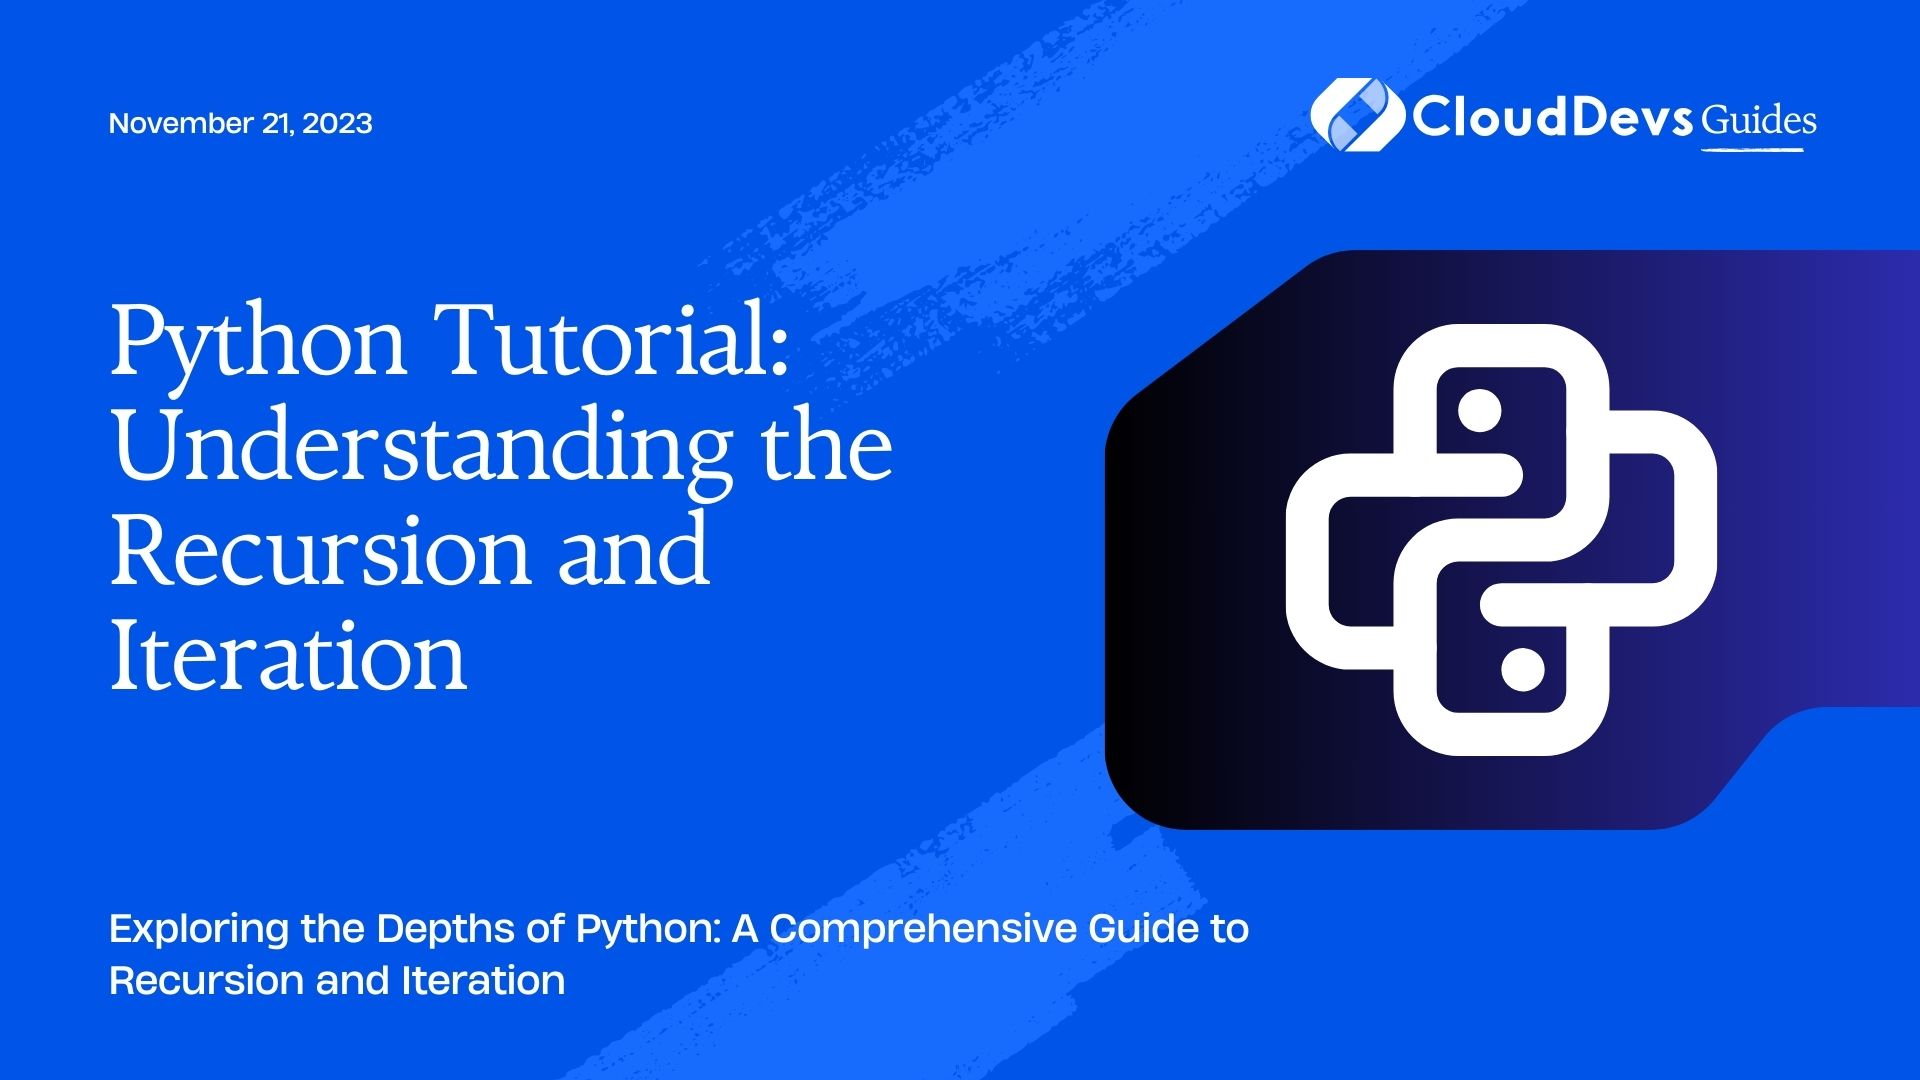 Python Tutorial: Understanding the Recursion and Iteration